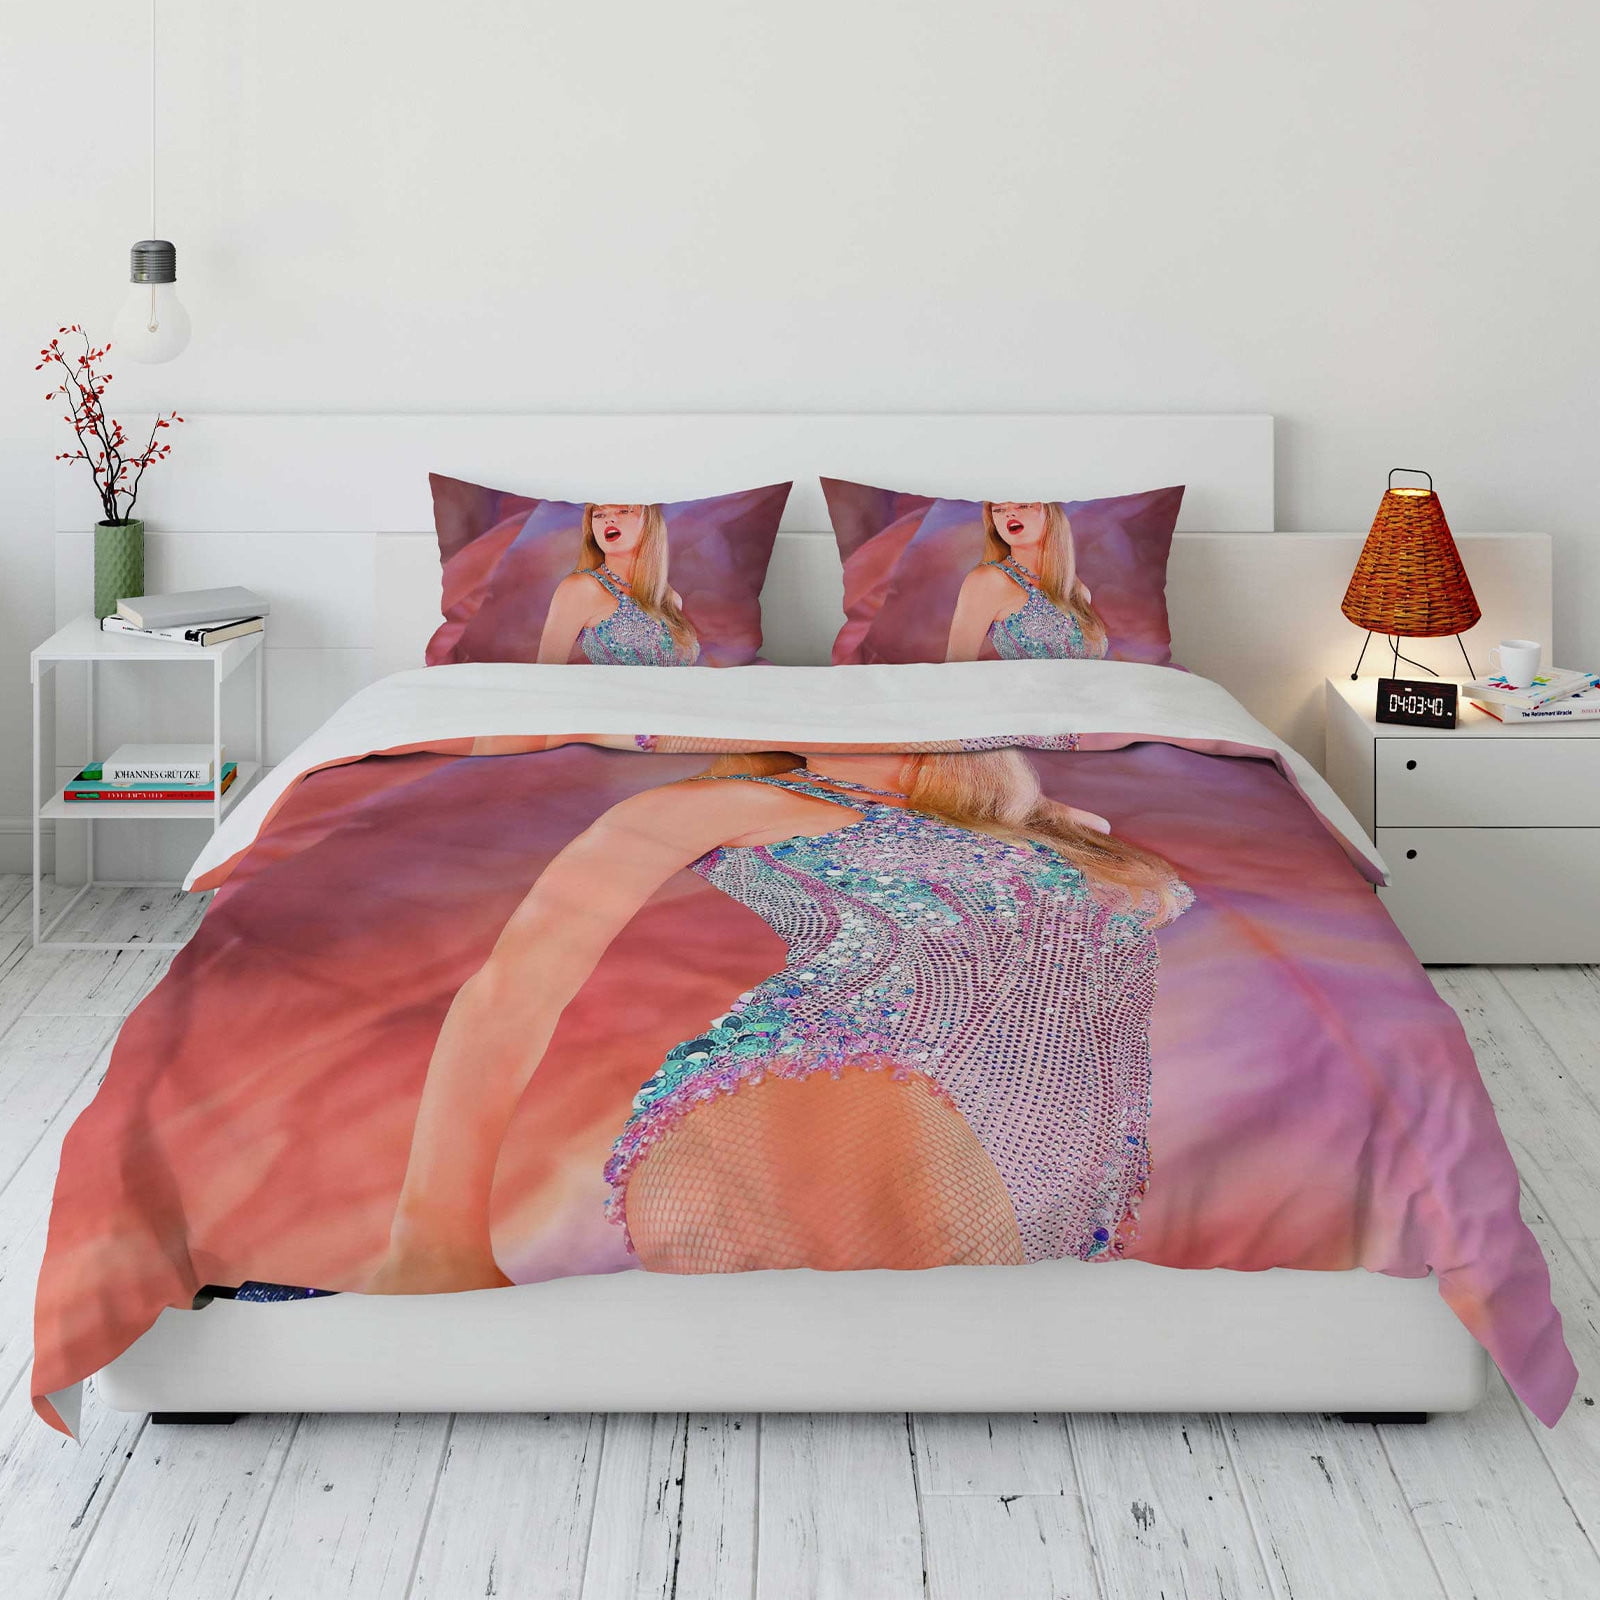 Taylor Swift Bedding Sets The Eras Tour Duvet Cover And Pillowcases  Swifties Bedroom Decorations Gift Taylors Albums Blanket And Pillow Covers  - Laughinks